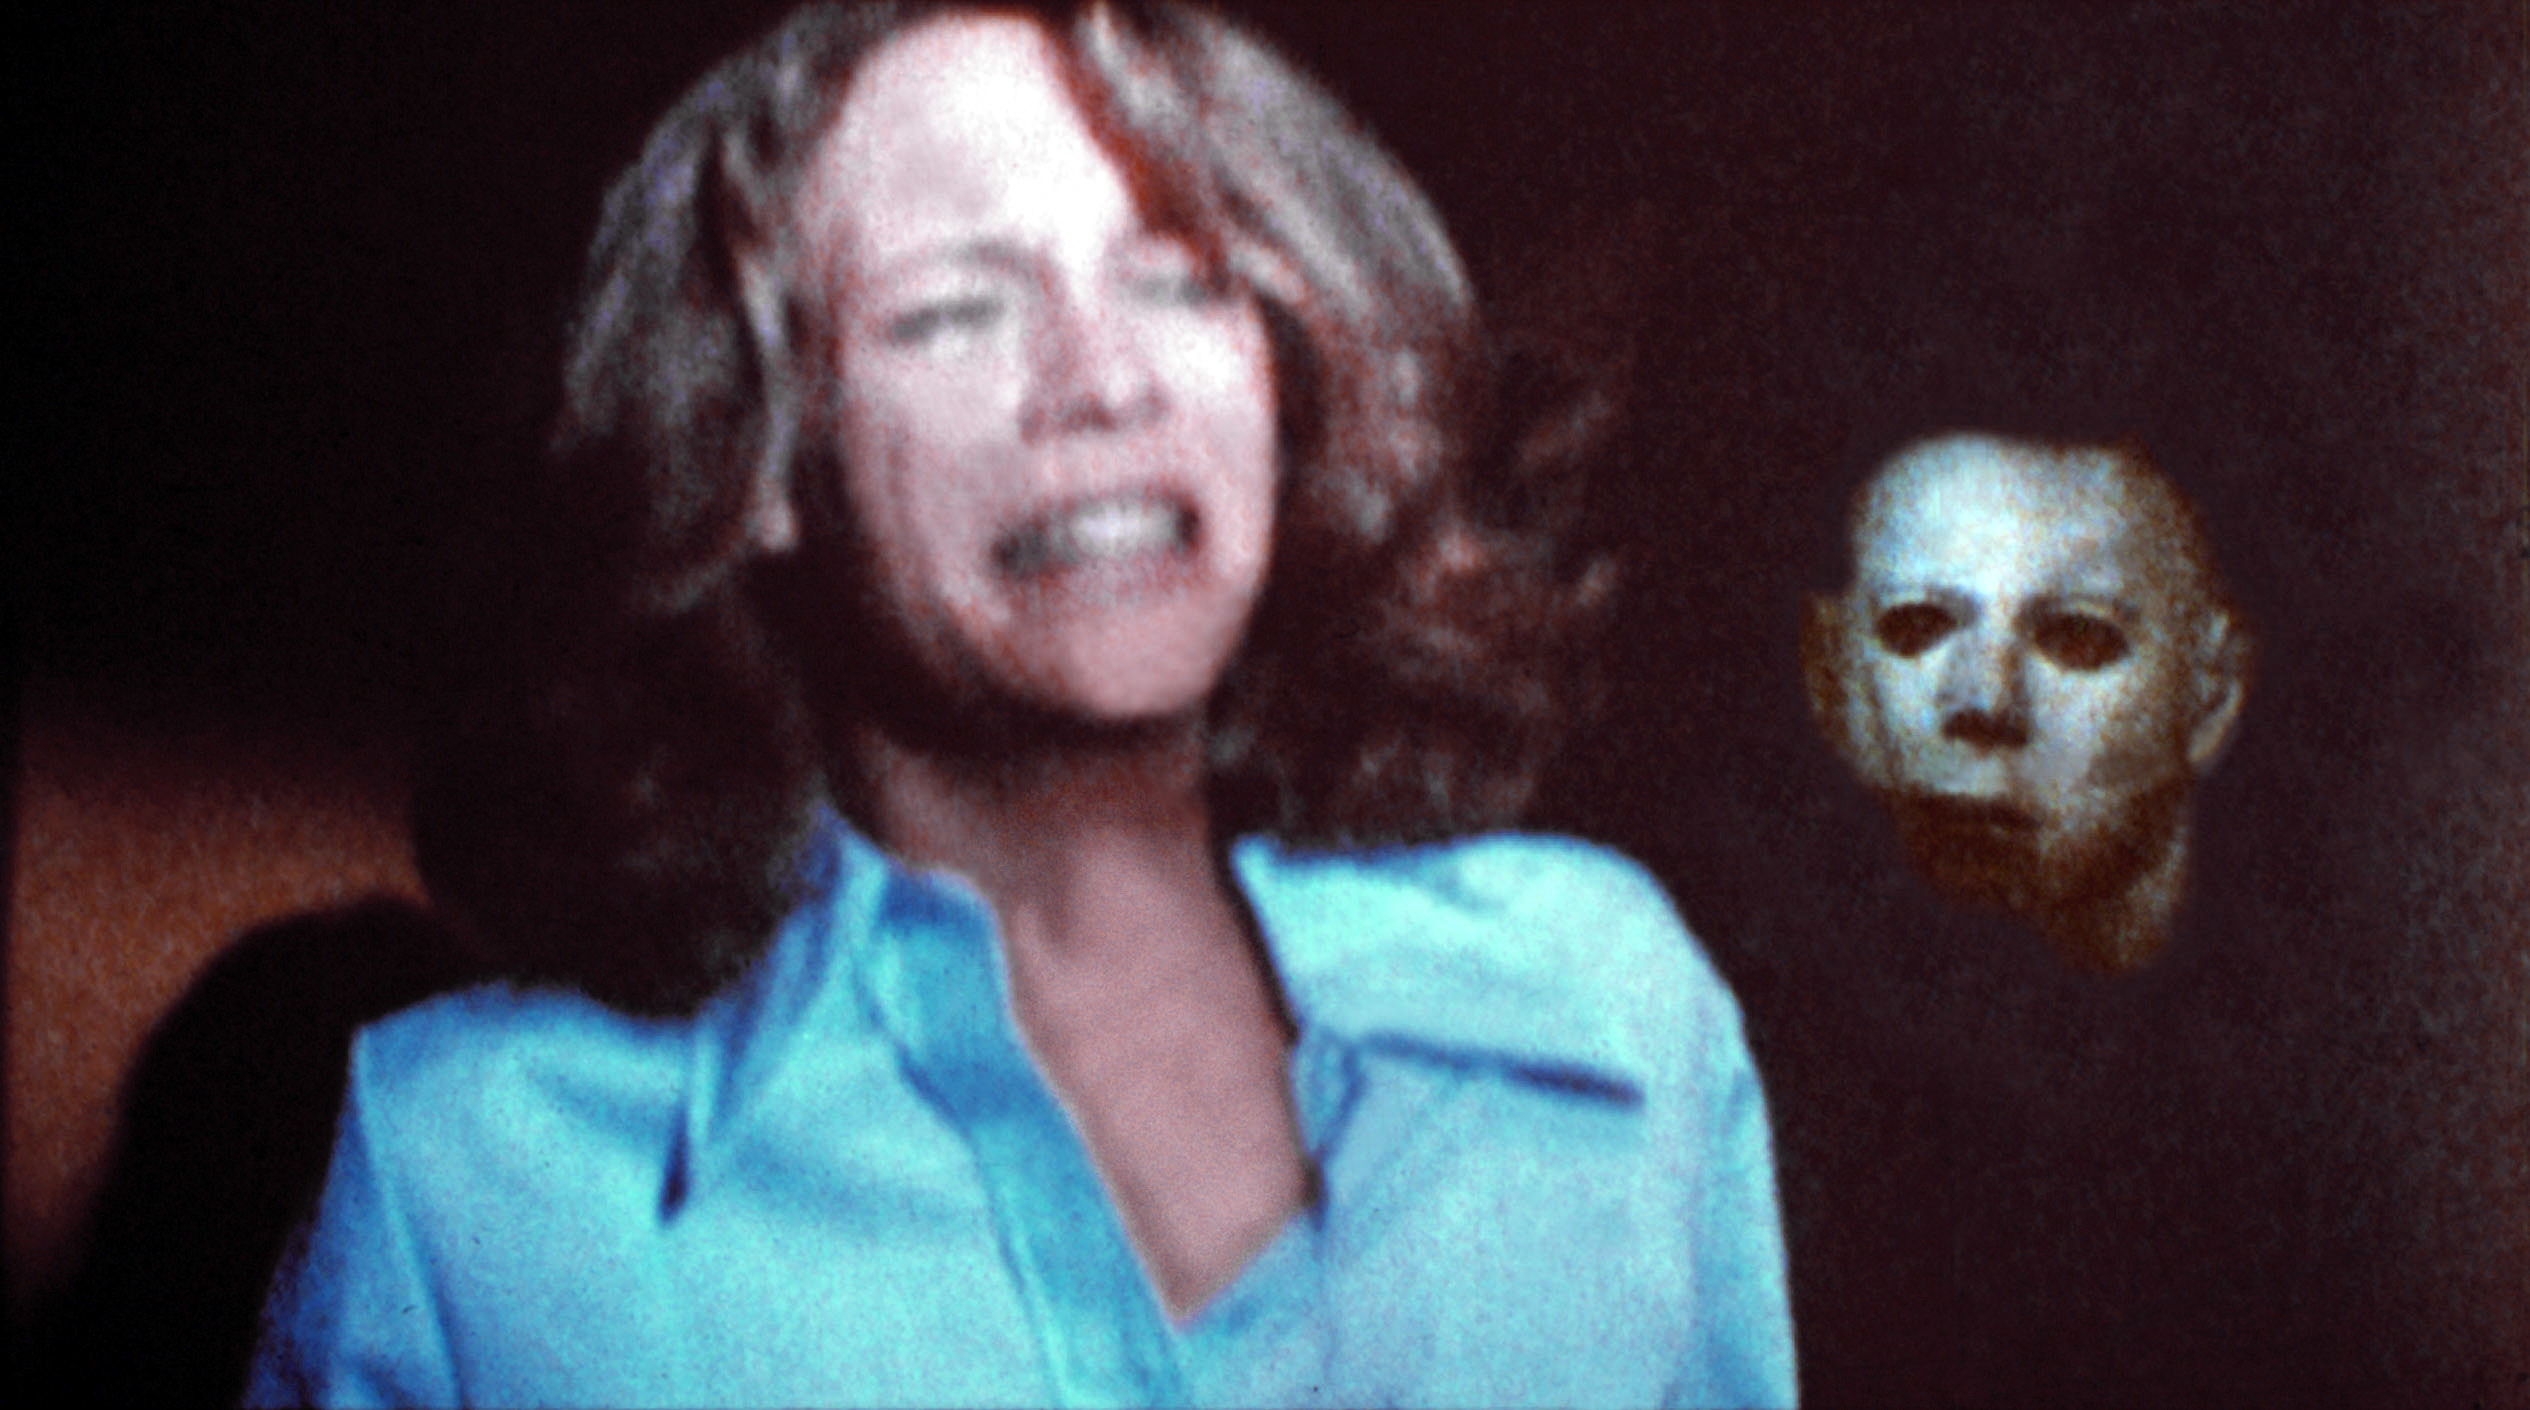 wearing his creepy rubber mask, Michael Myers sneaks up behind Laurie